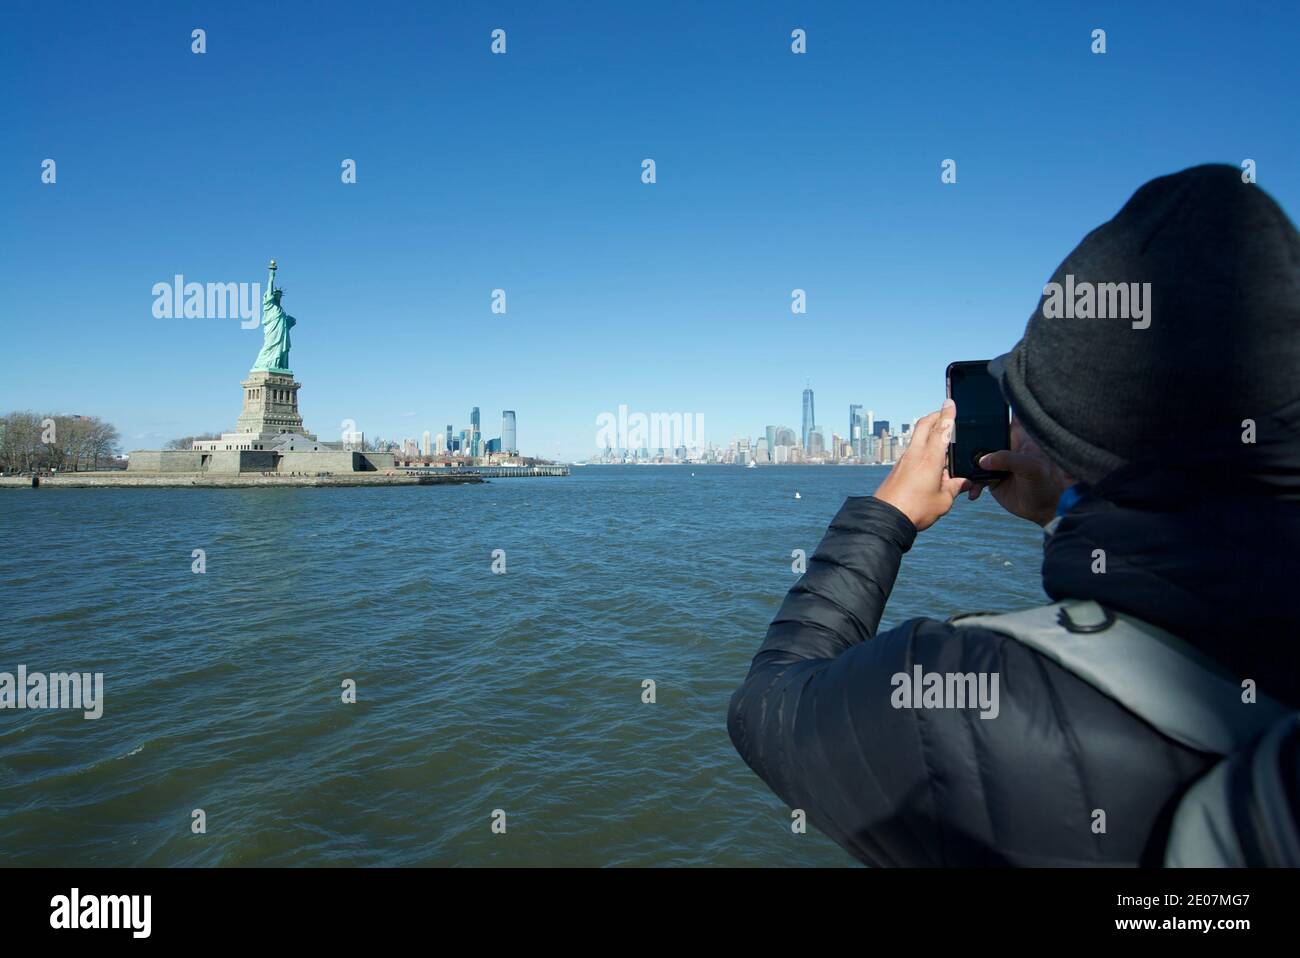 Tourist taking a photo of the Statue of Liberty New York, New York City Statue, Liberty Island New York, NYC. Phone photography. Tourists and visitors Stock Photo